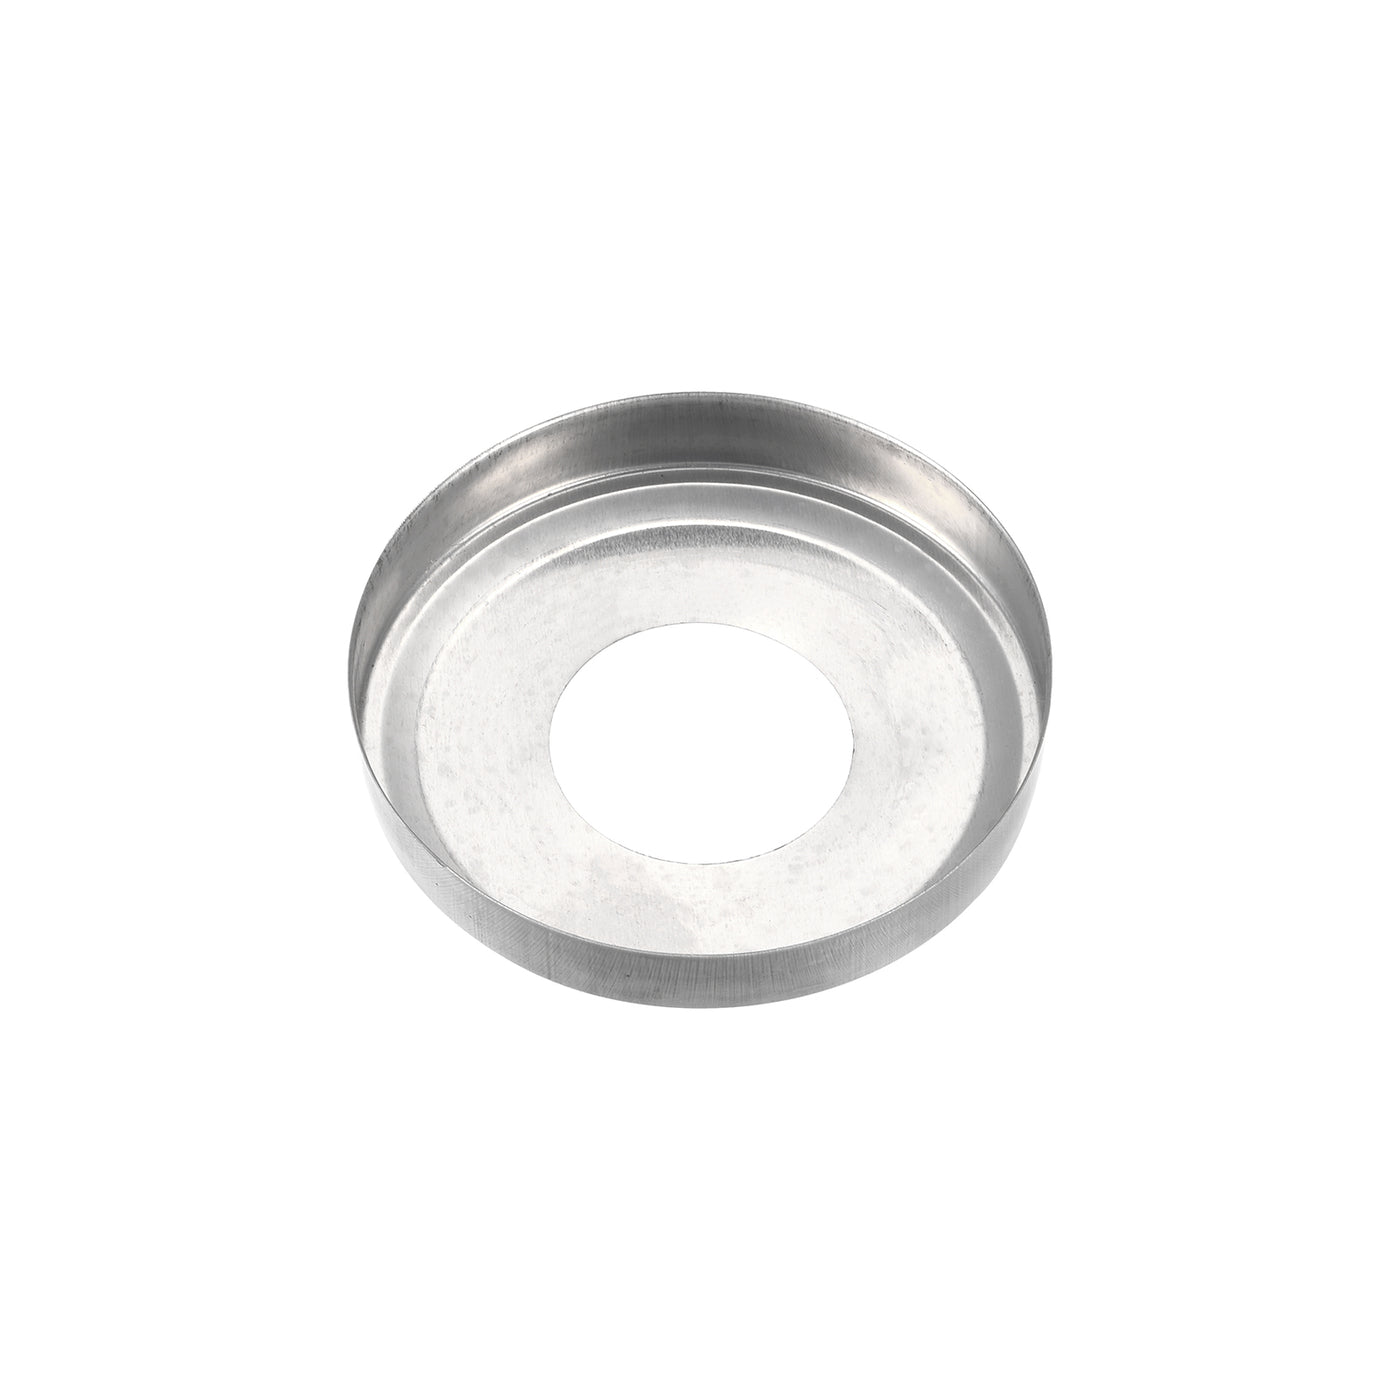 Uxcell Uxcell Round Escutcheon Plate, 12pcs 68 x 14mm 304 Stainless Steel Water Pipe Cover for 19.5mm Diameter Pipe